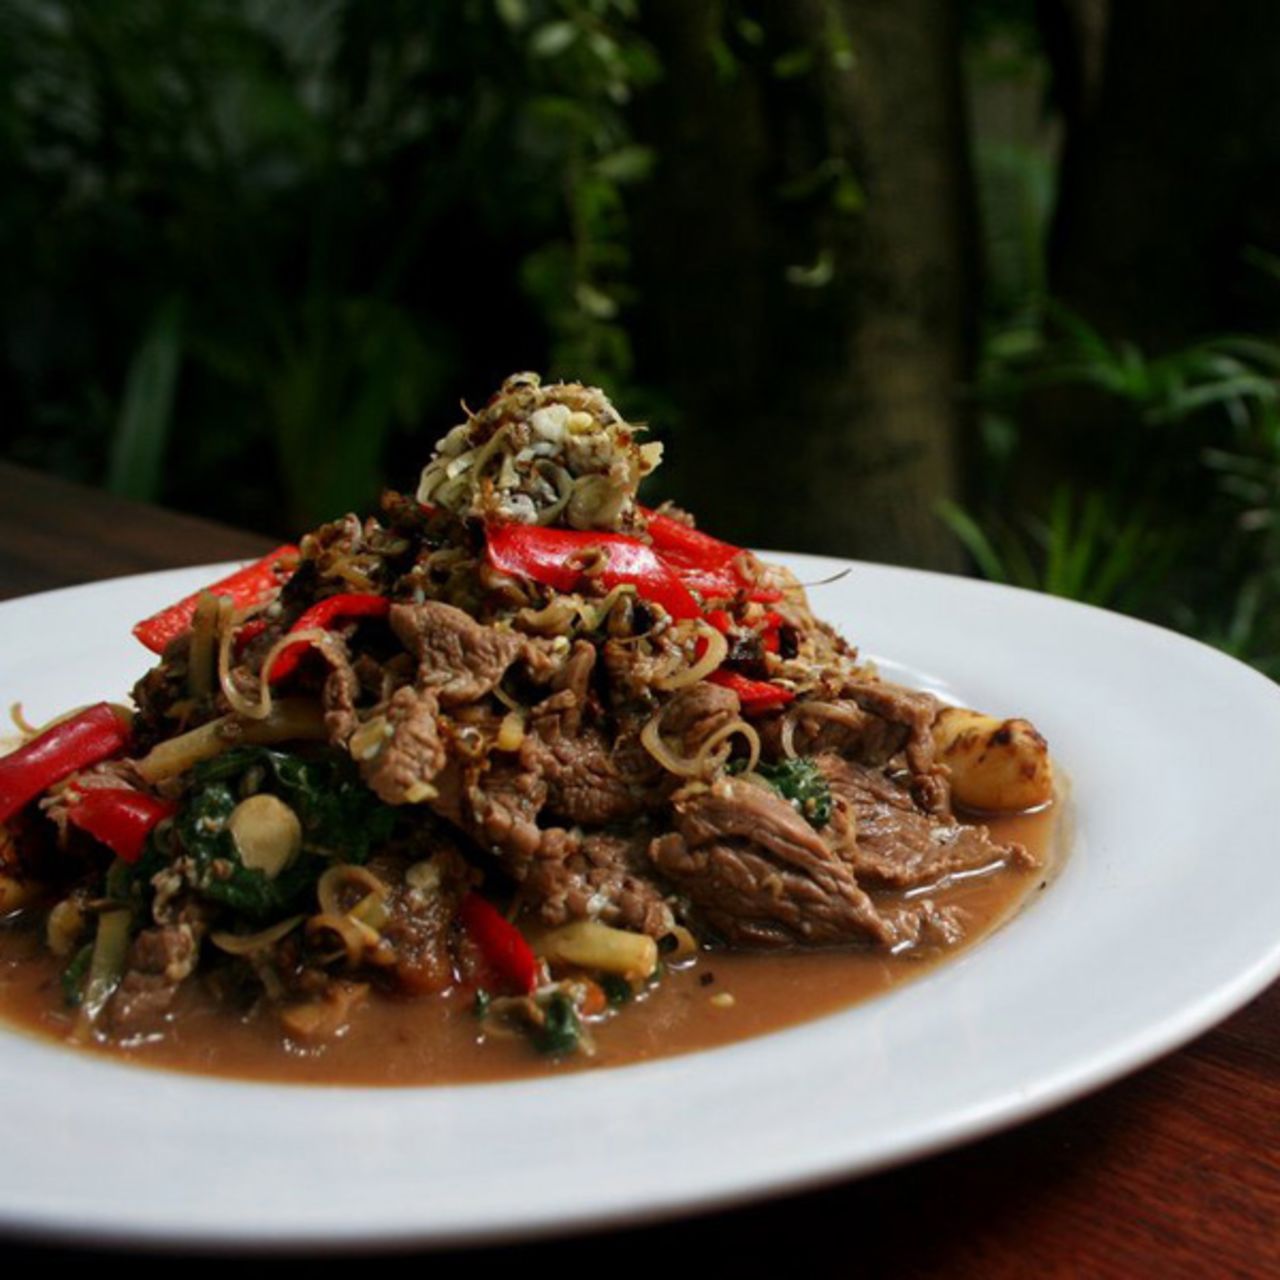 Tourists will find this Cambodian insect dish slightly more appealing than the giant spiders. Mixed in with beef and holy basil, the red tree ants add a sour flavor to this stir-fried dish. 